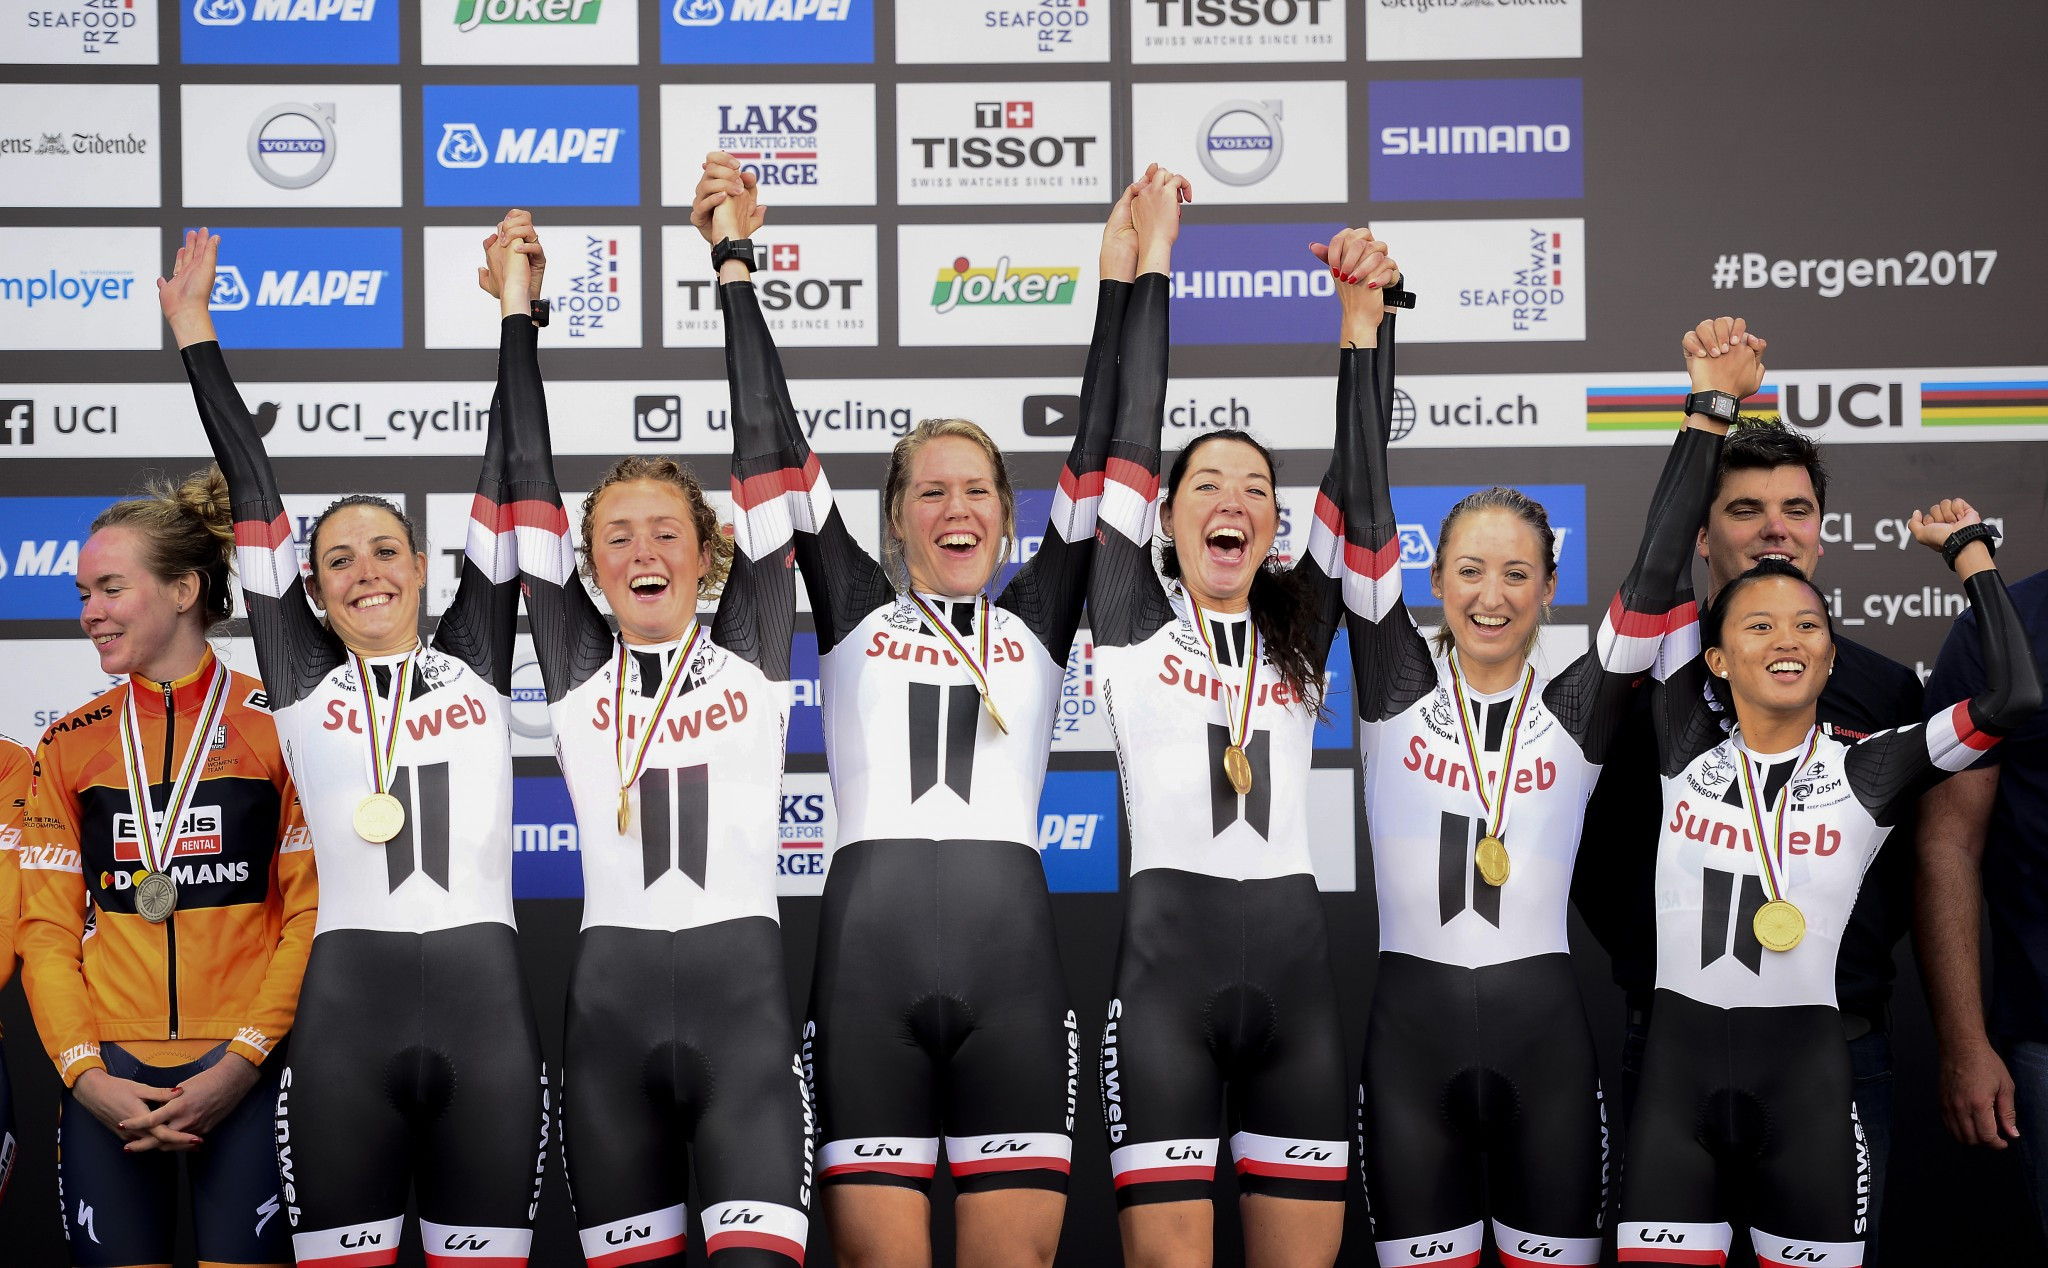 Team Sunweb clinch team time trial double as UCI World Road Championships begins